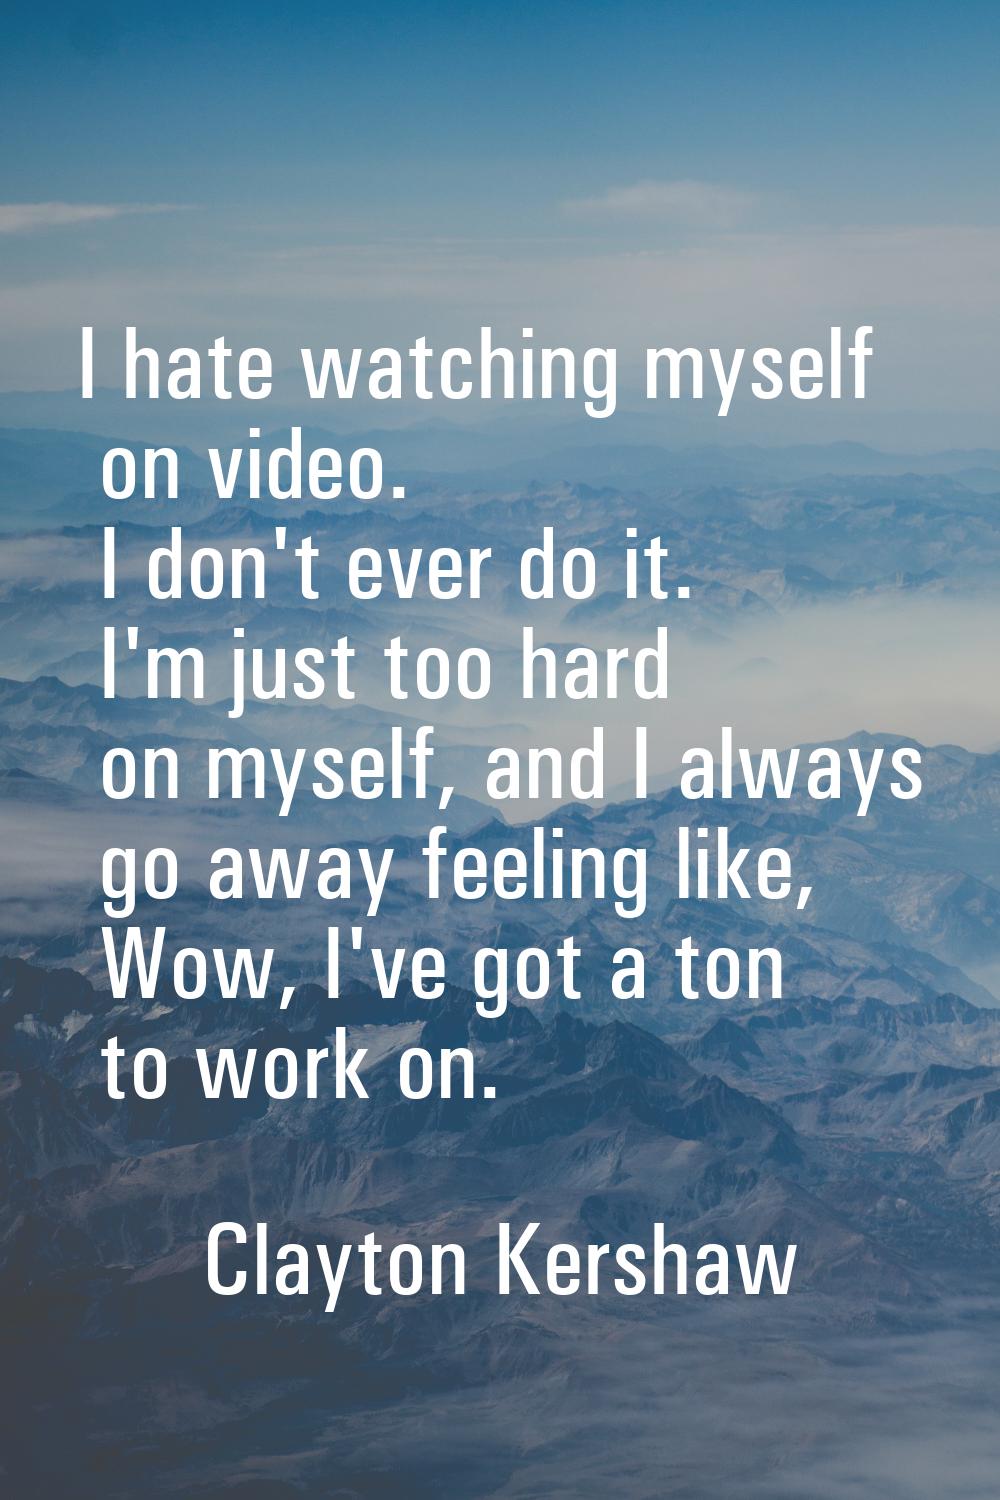 I hate watching myself on video. I don't ever do it. I'm just too hard on myself, and I always go a